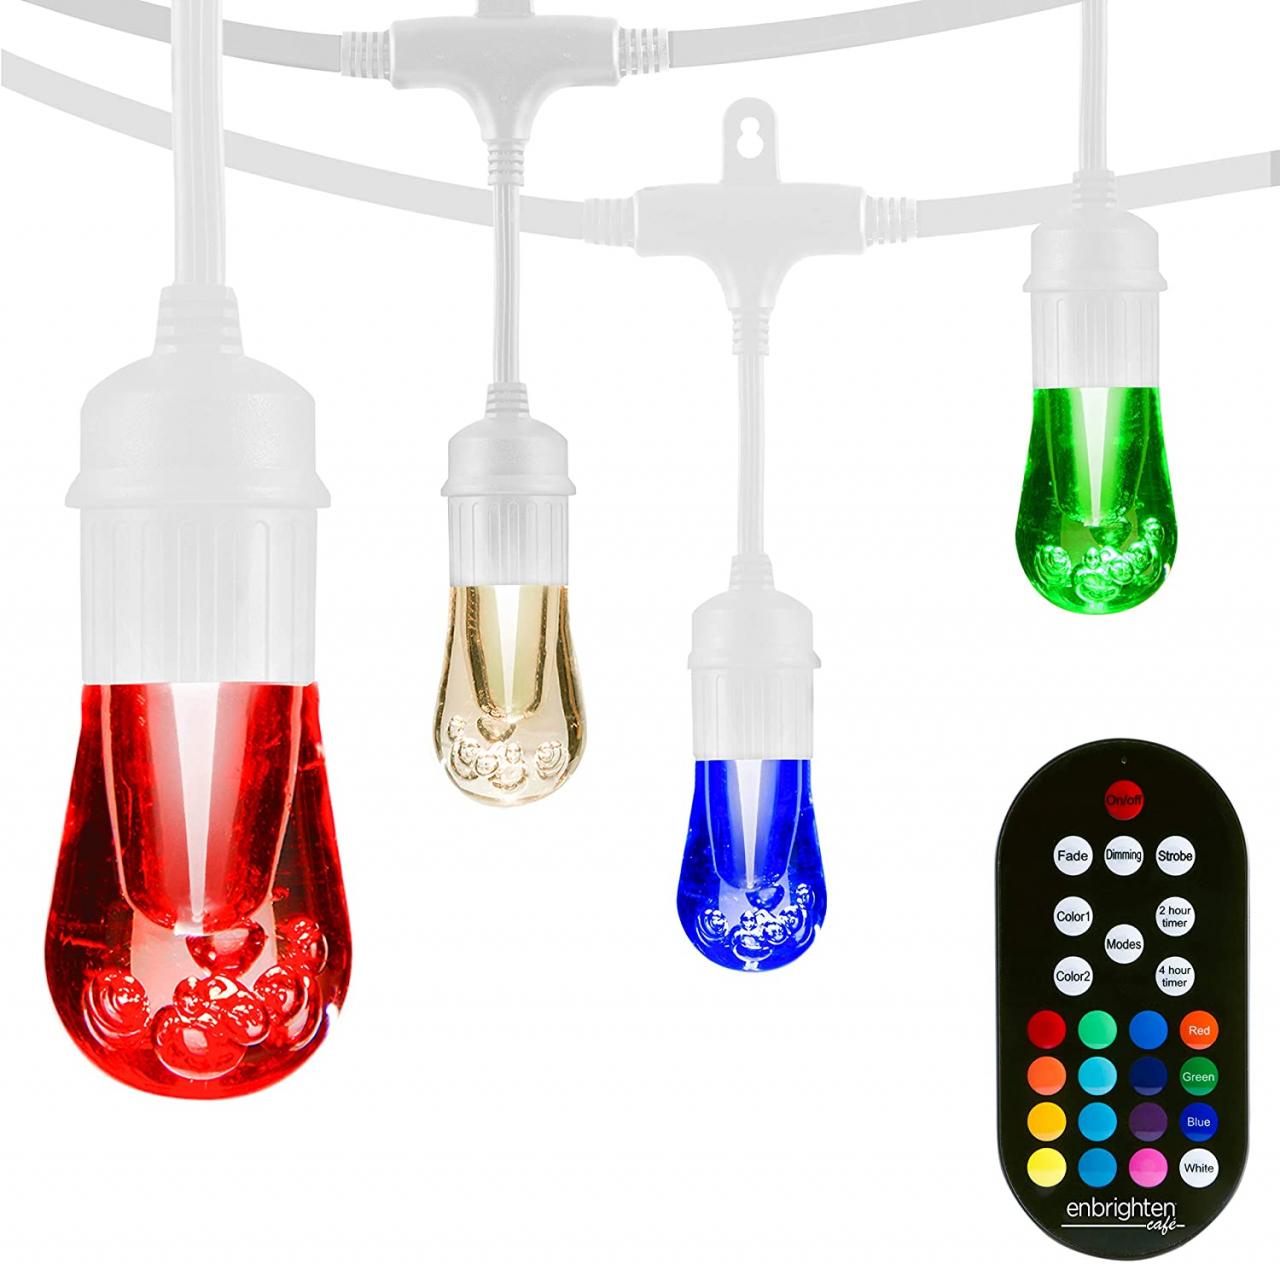 Buy Enbrighten Vintage Seasons LED Warm White & Color Changing Café String  Lights, White, 24ft, 12 Premium Impact Resistant Lifetime Bulbs, Wireless,  Weatherproof, Indoor/Outdoor, Commercial Grade, 39511 Online in India.  B073HBZS35